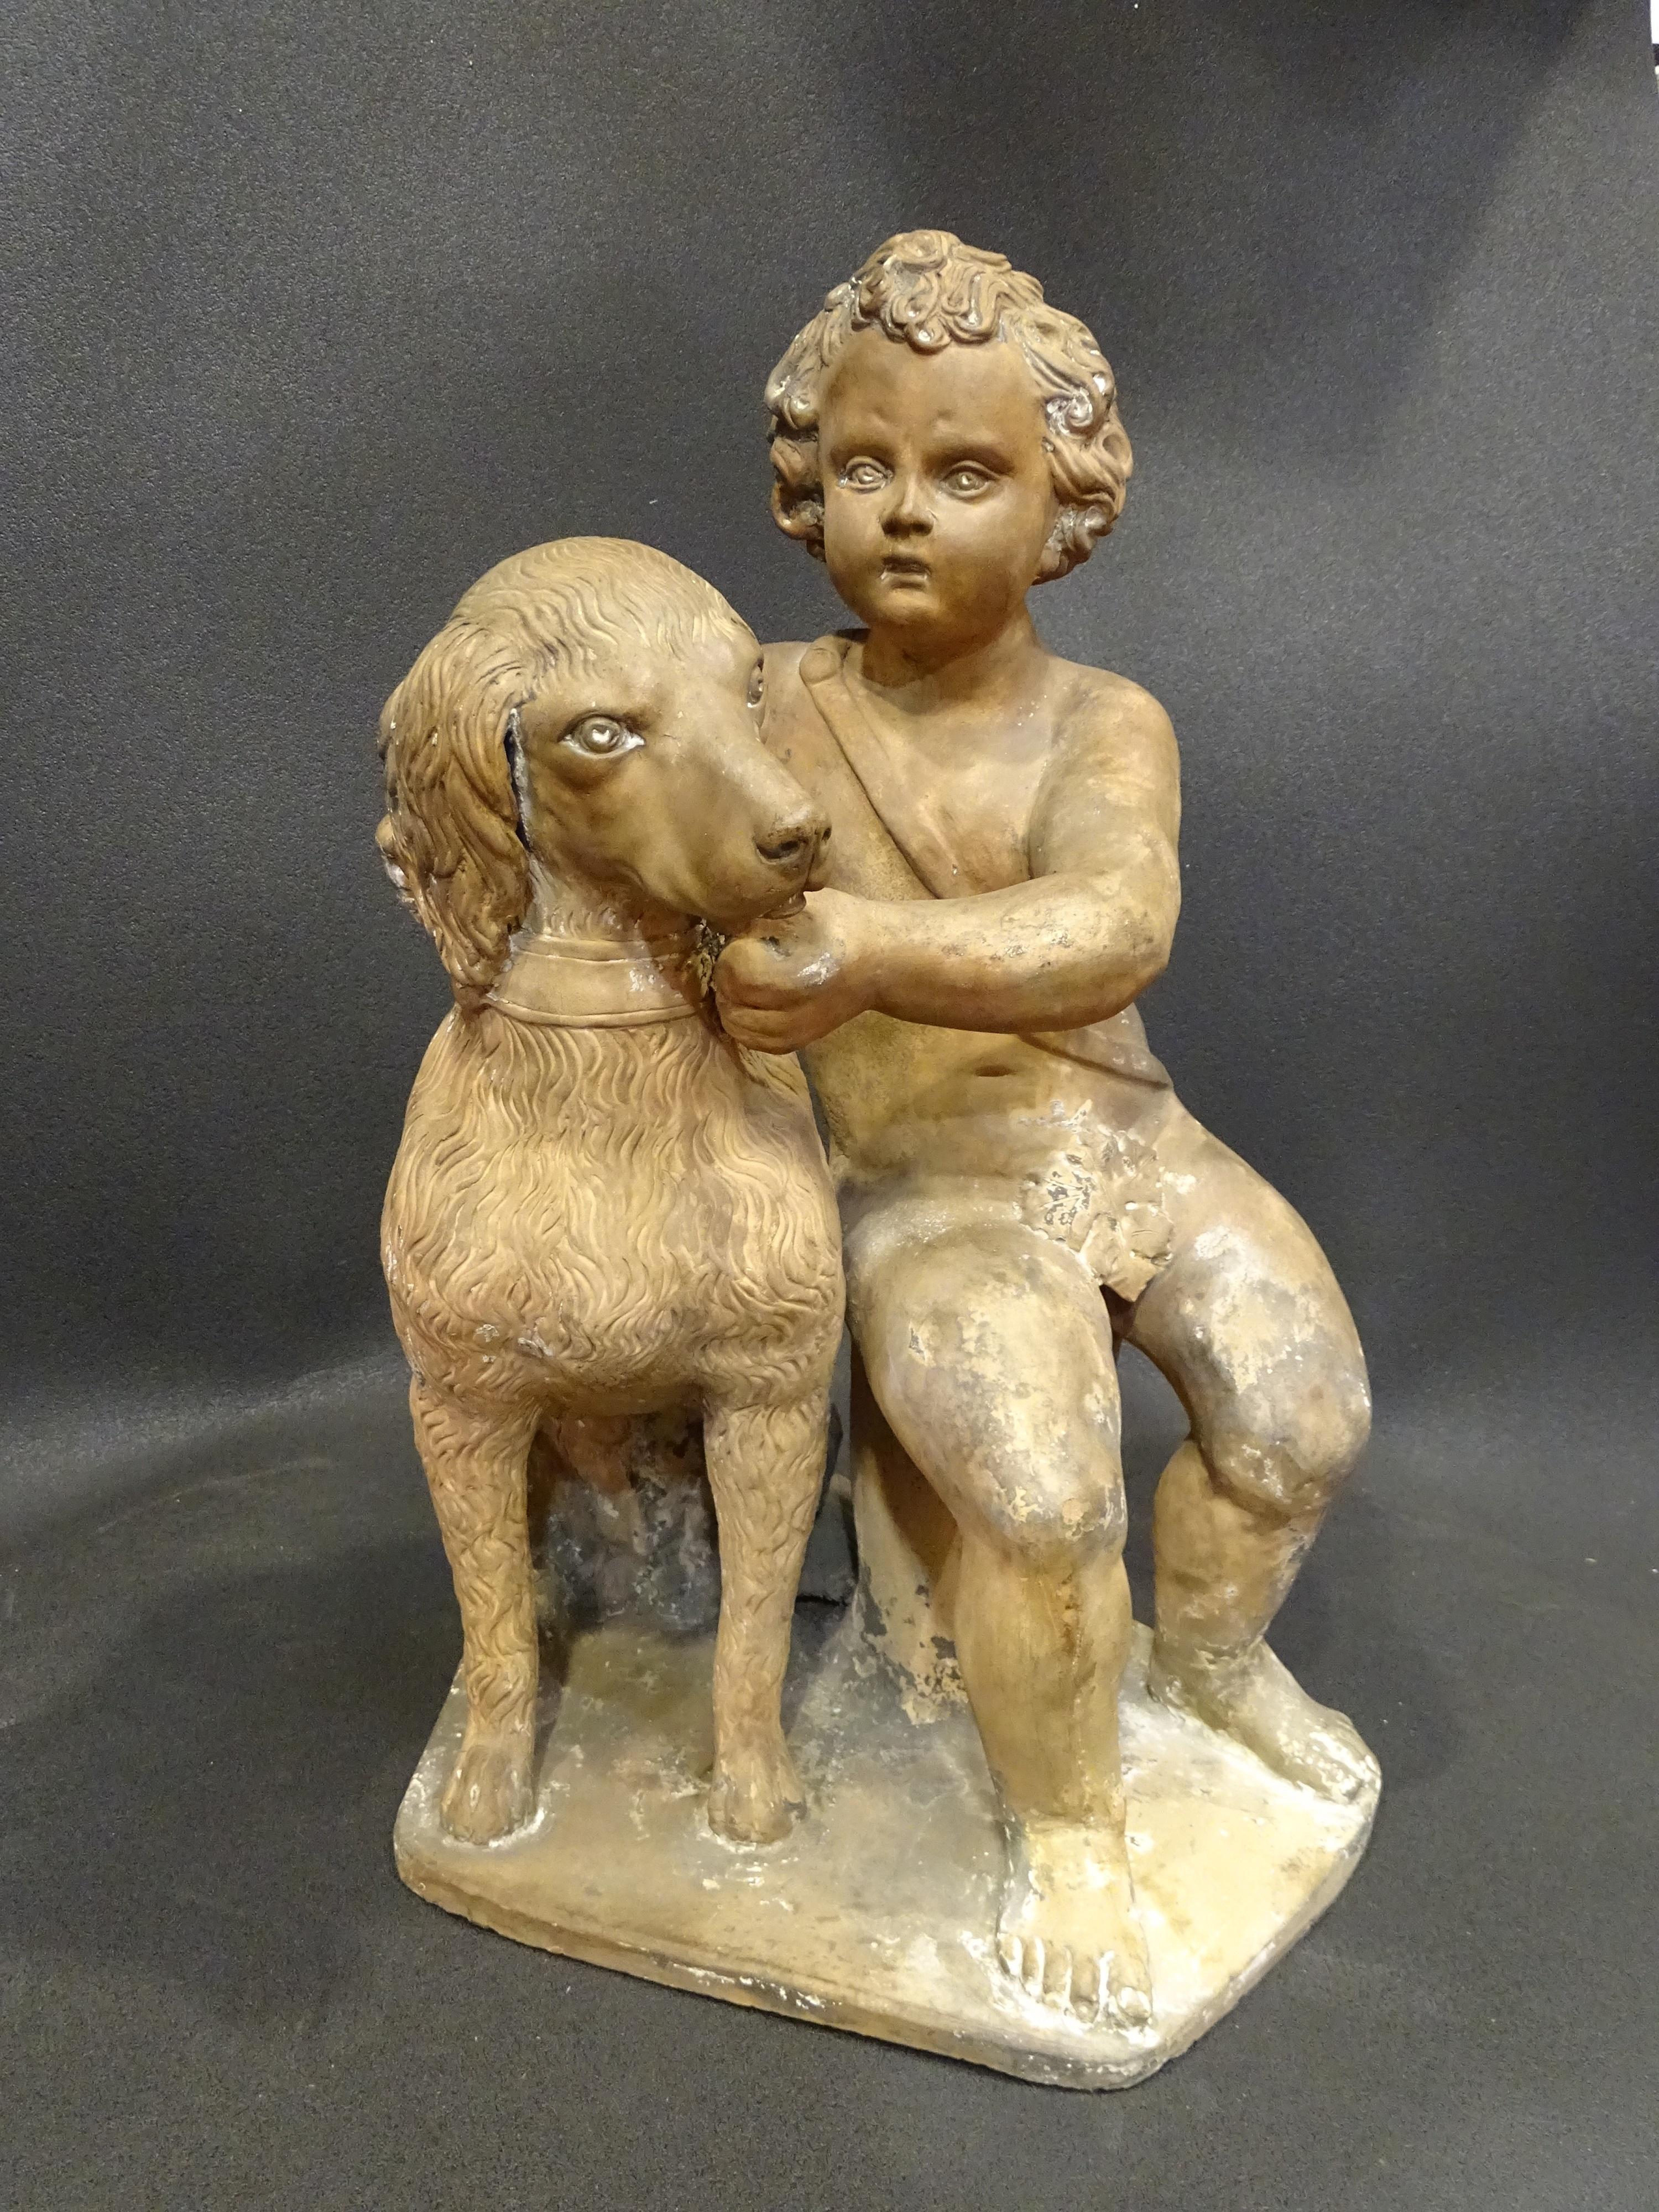 Baroque 18th Century French Terracotta Sculpture, Child with Dog